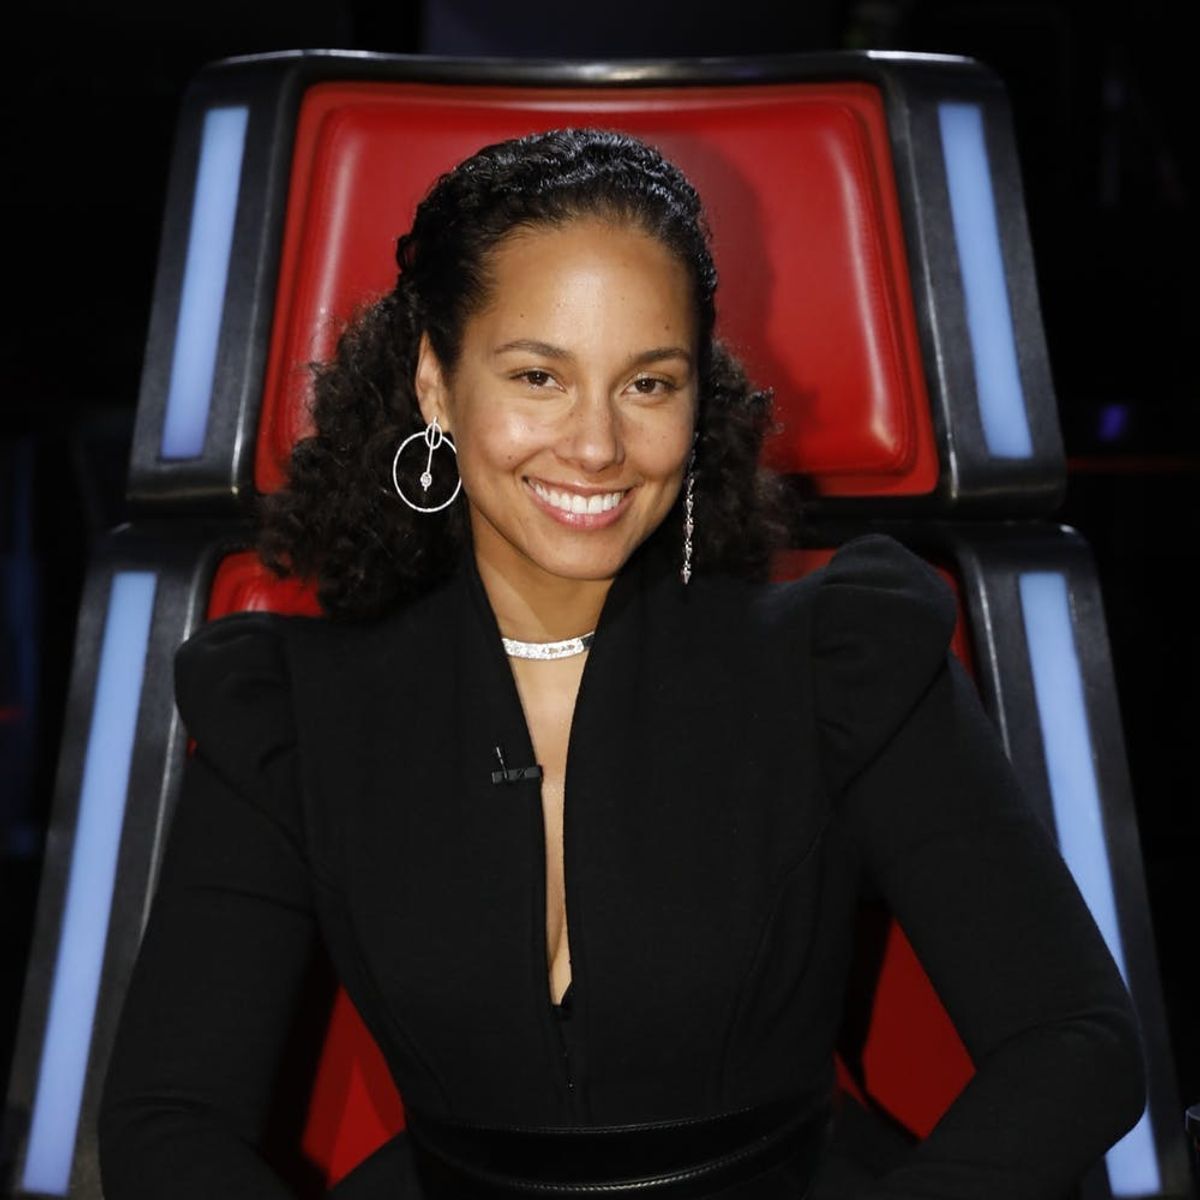 Alicia Keys Is Returning to “The Voice” for Season 14